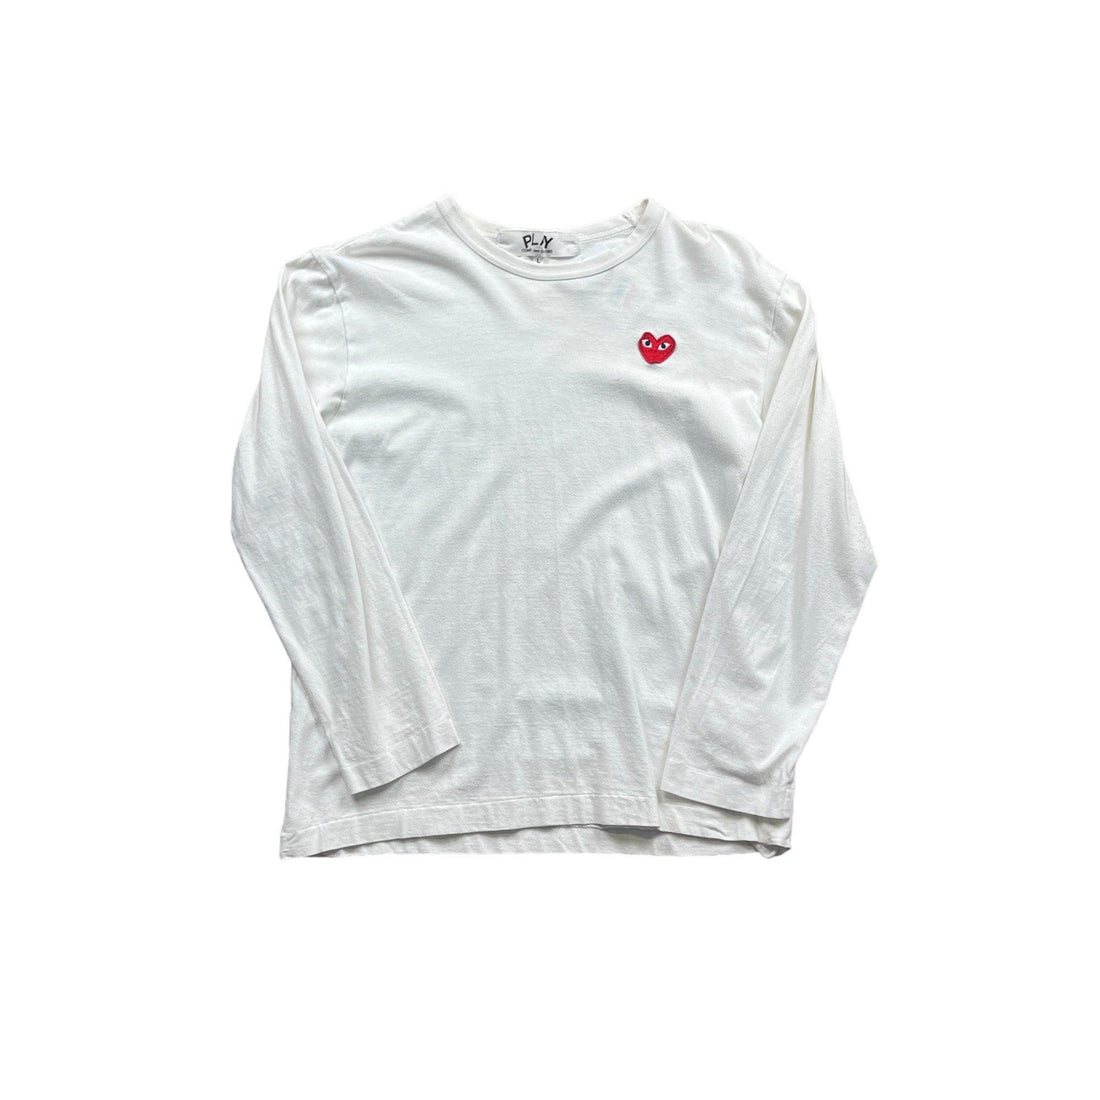 White Comme Des Garcons (CDG) Long Sleeve Tee - Large (Recommended Size - Medium) - The Streetwear Studio